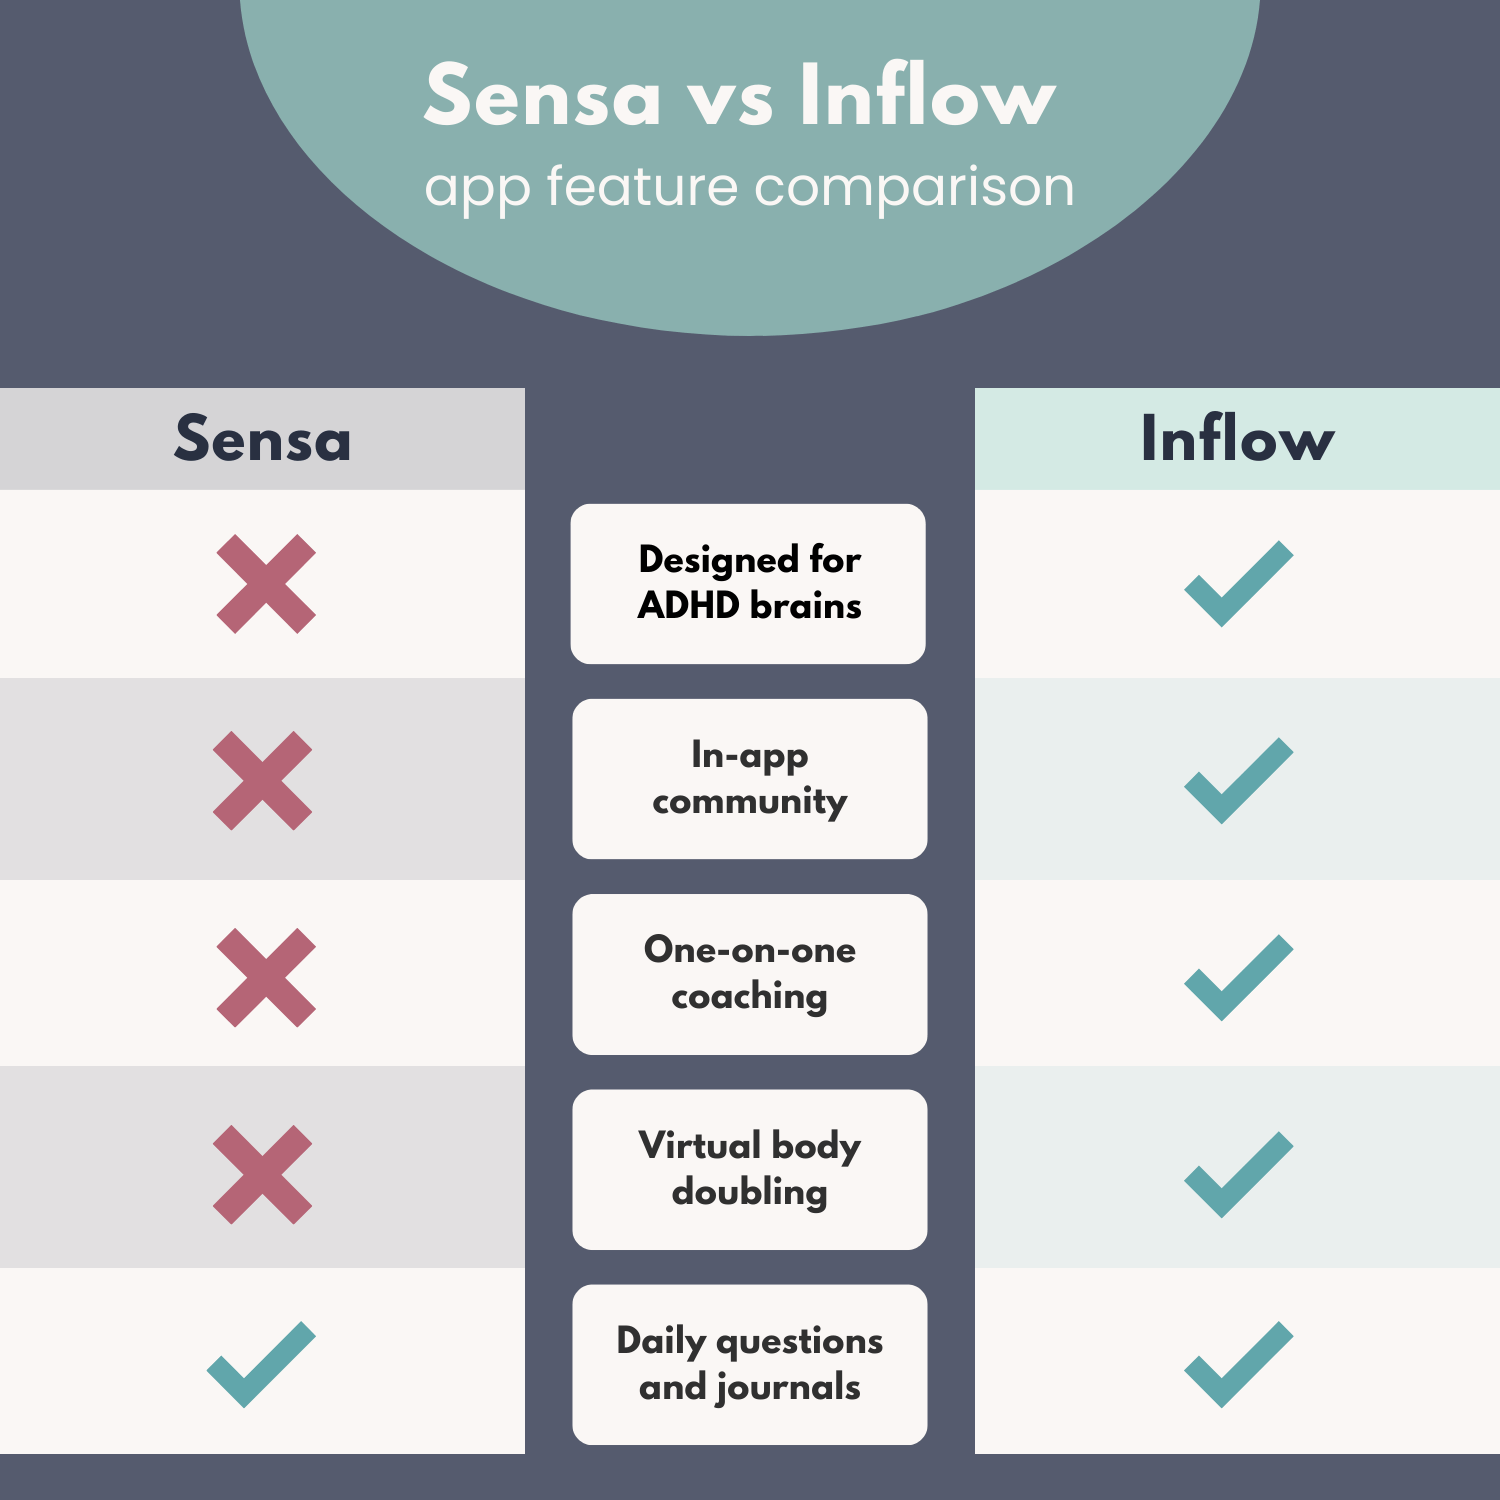 sensa vs inflow app feature comparison. designed for ADHD brains? Sensa no, Inflow yes. In-app community? Sensa no, Inflow yes. One on one coaching? Sensa no Inflow yes. Virtual body doubling? Sensa no Inflow yes. Daily questions and journals? Sensa yes Inflow yes.